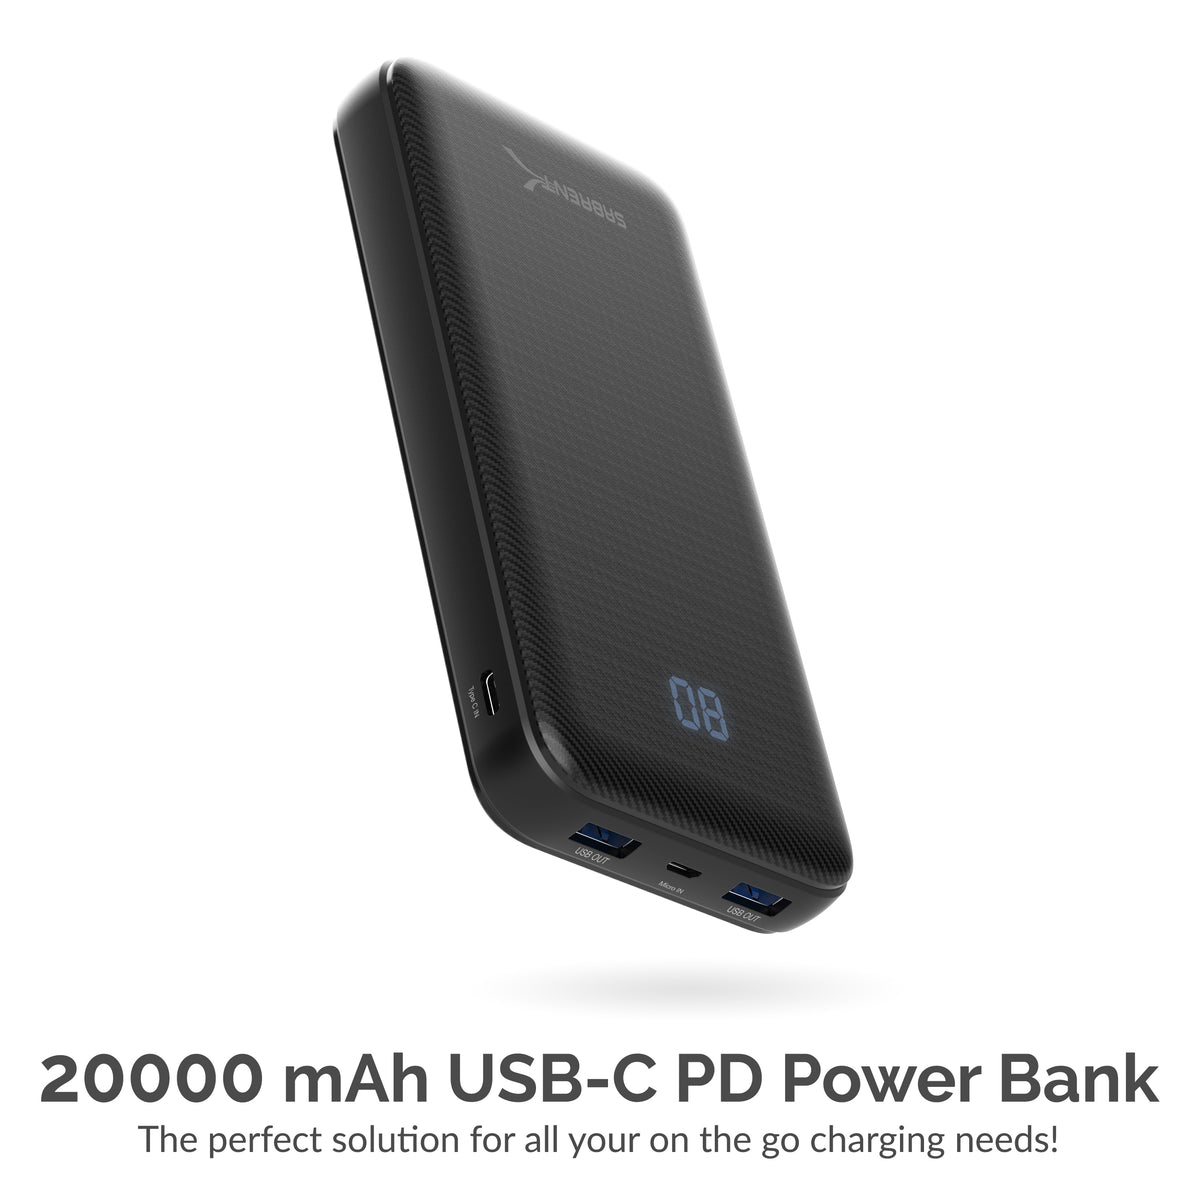 20000 mAh USB C PD Power Bank with Quick Charge 3.0